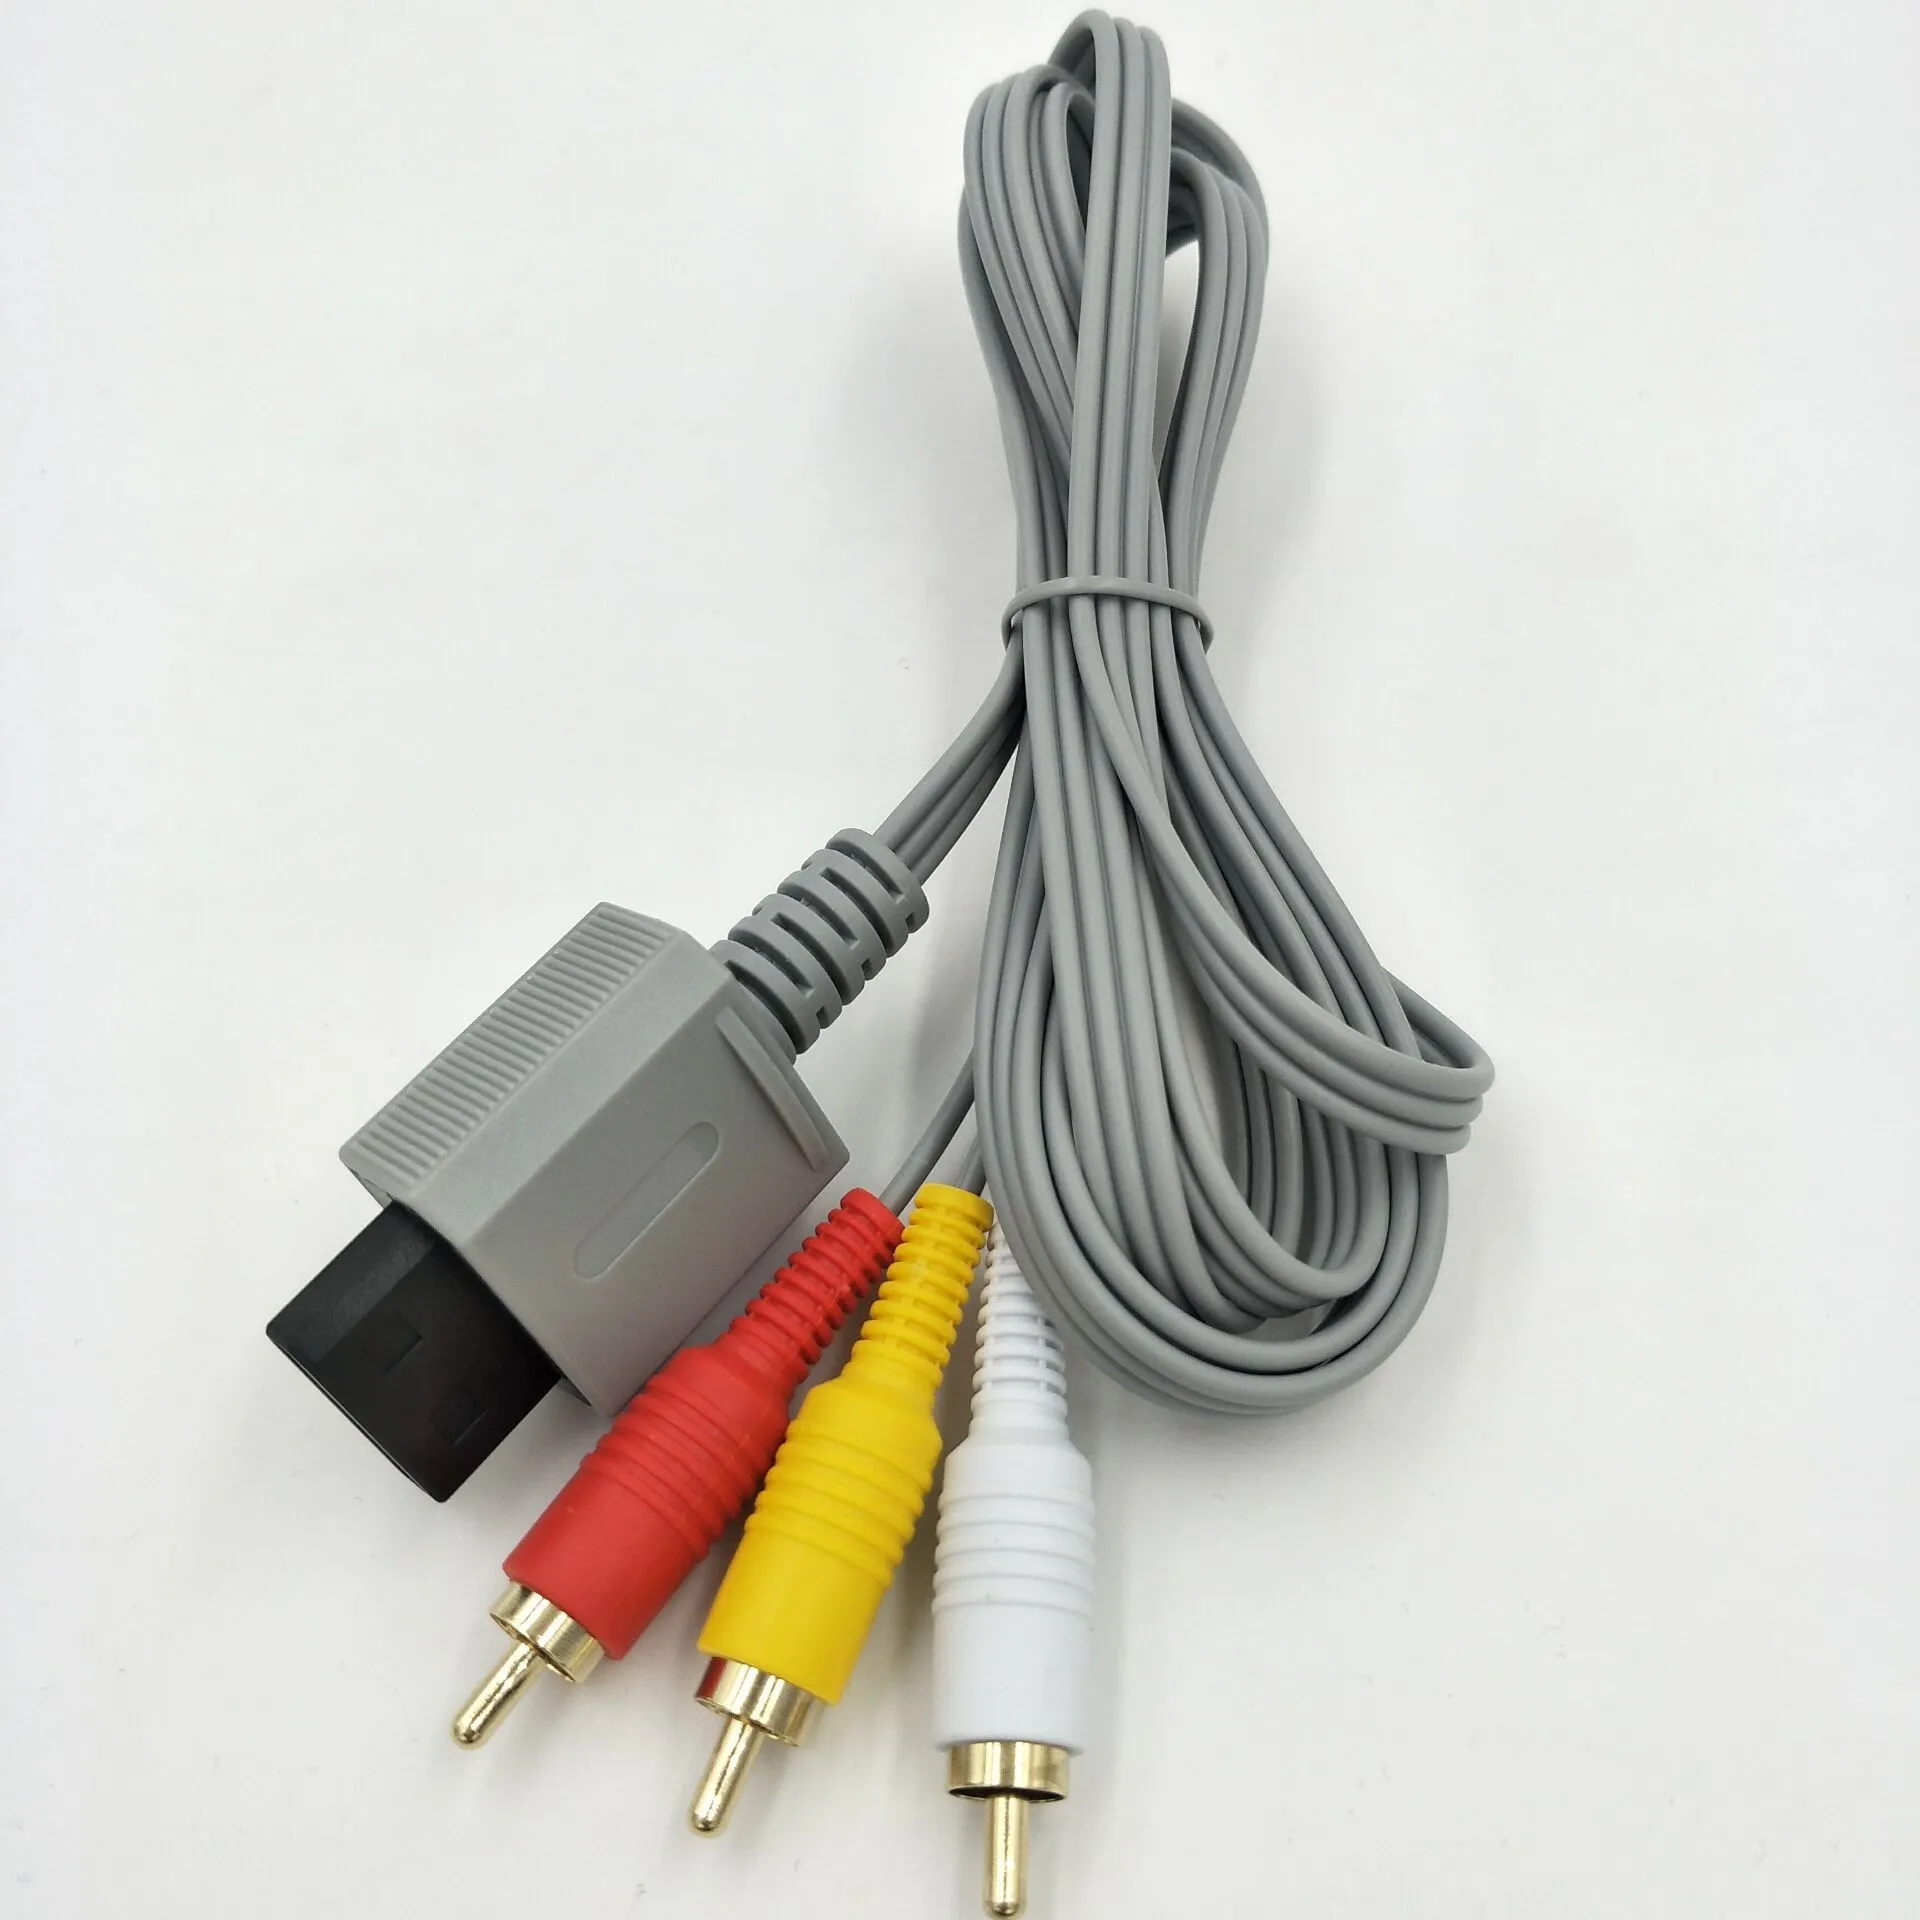 Nintendo Wii RVL-011 HD Component Video Cable for sale online